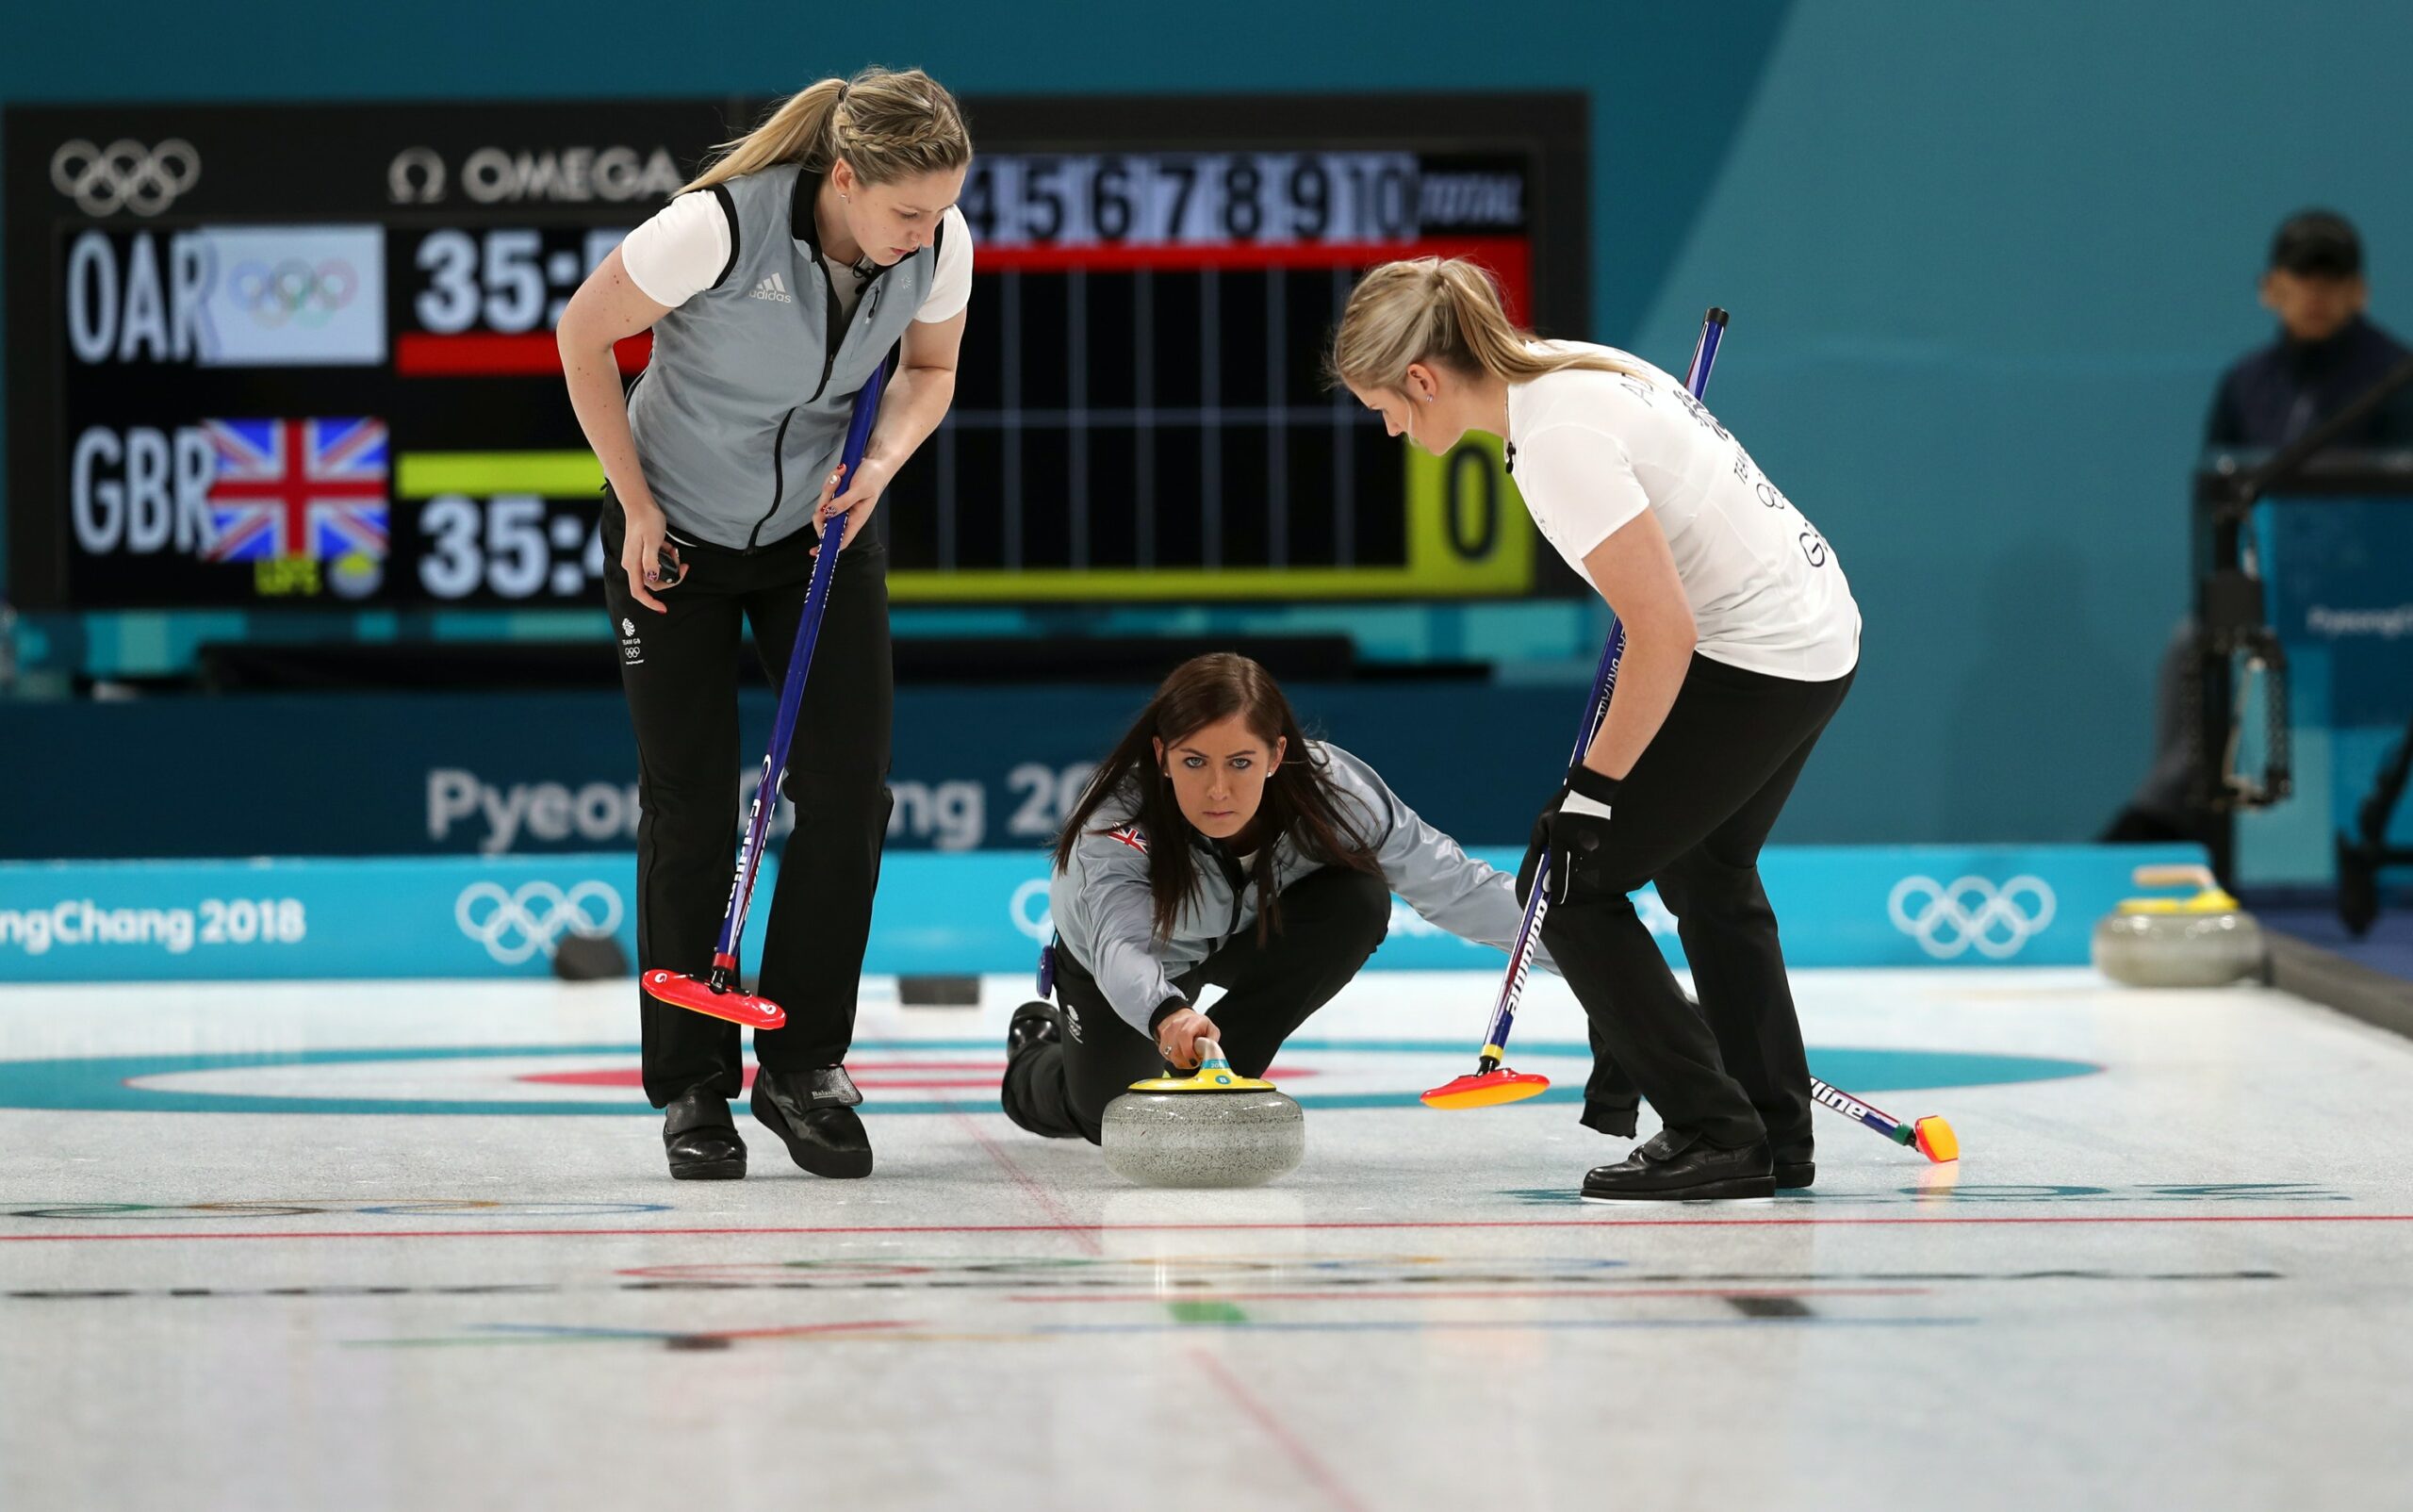 Is curling an olympic sport?